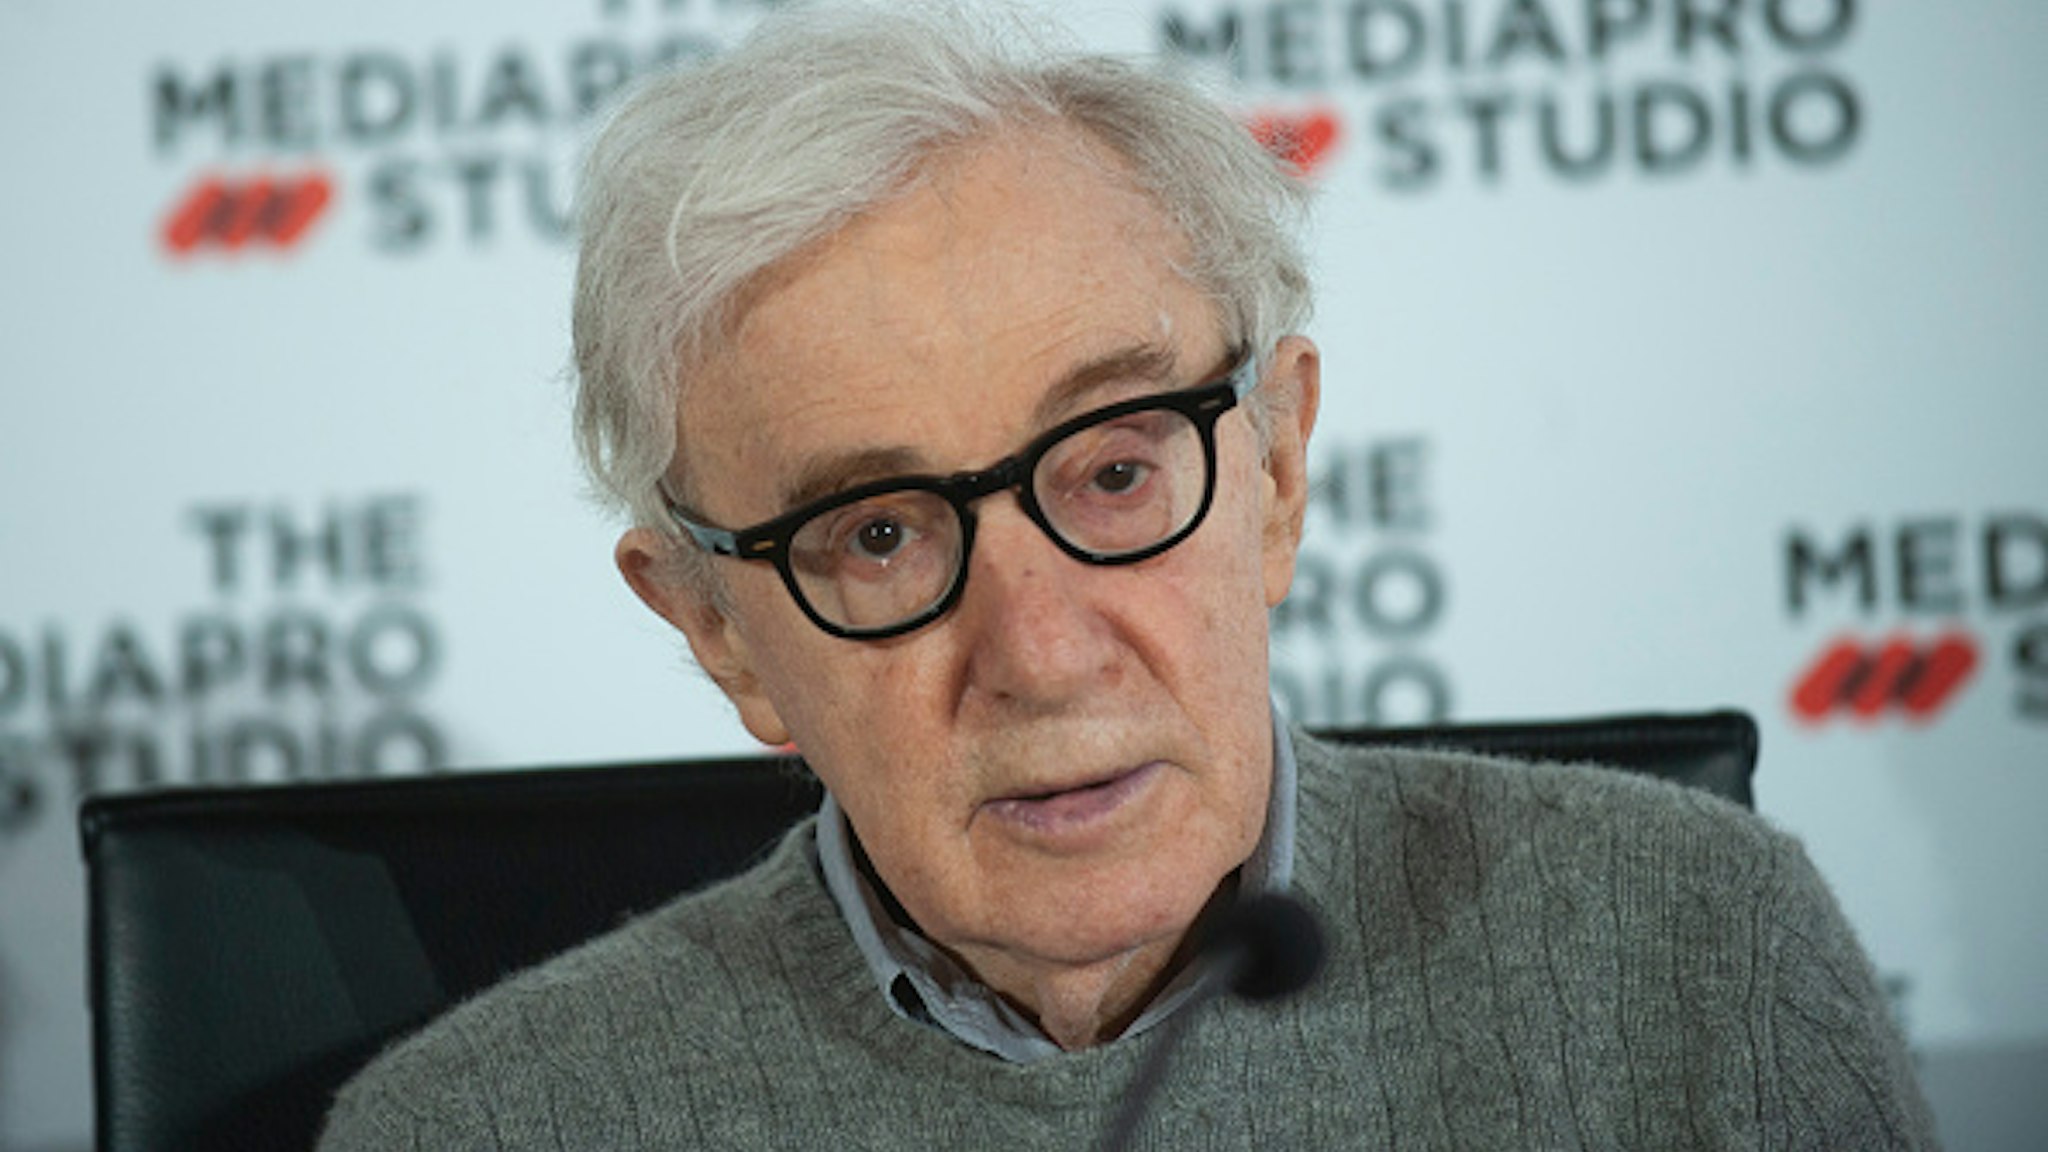 American film director Woody Allen attends a Press Conference at Kursaal auditorium to talk about the new film he is filming in San Sebastian on July 09, 2019 in San Sebastian, Spain.